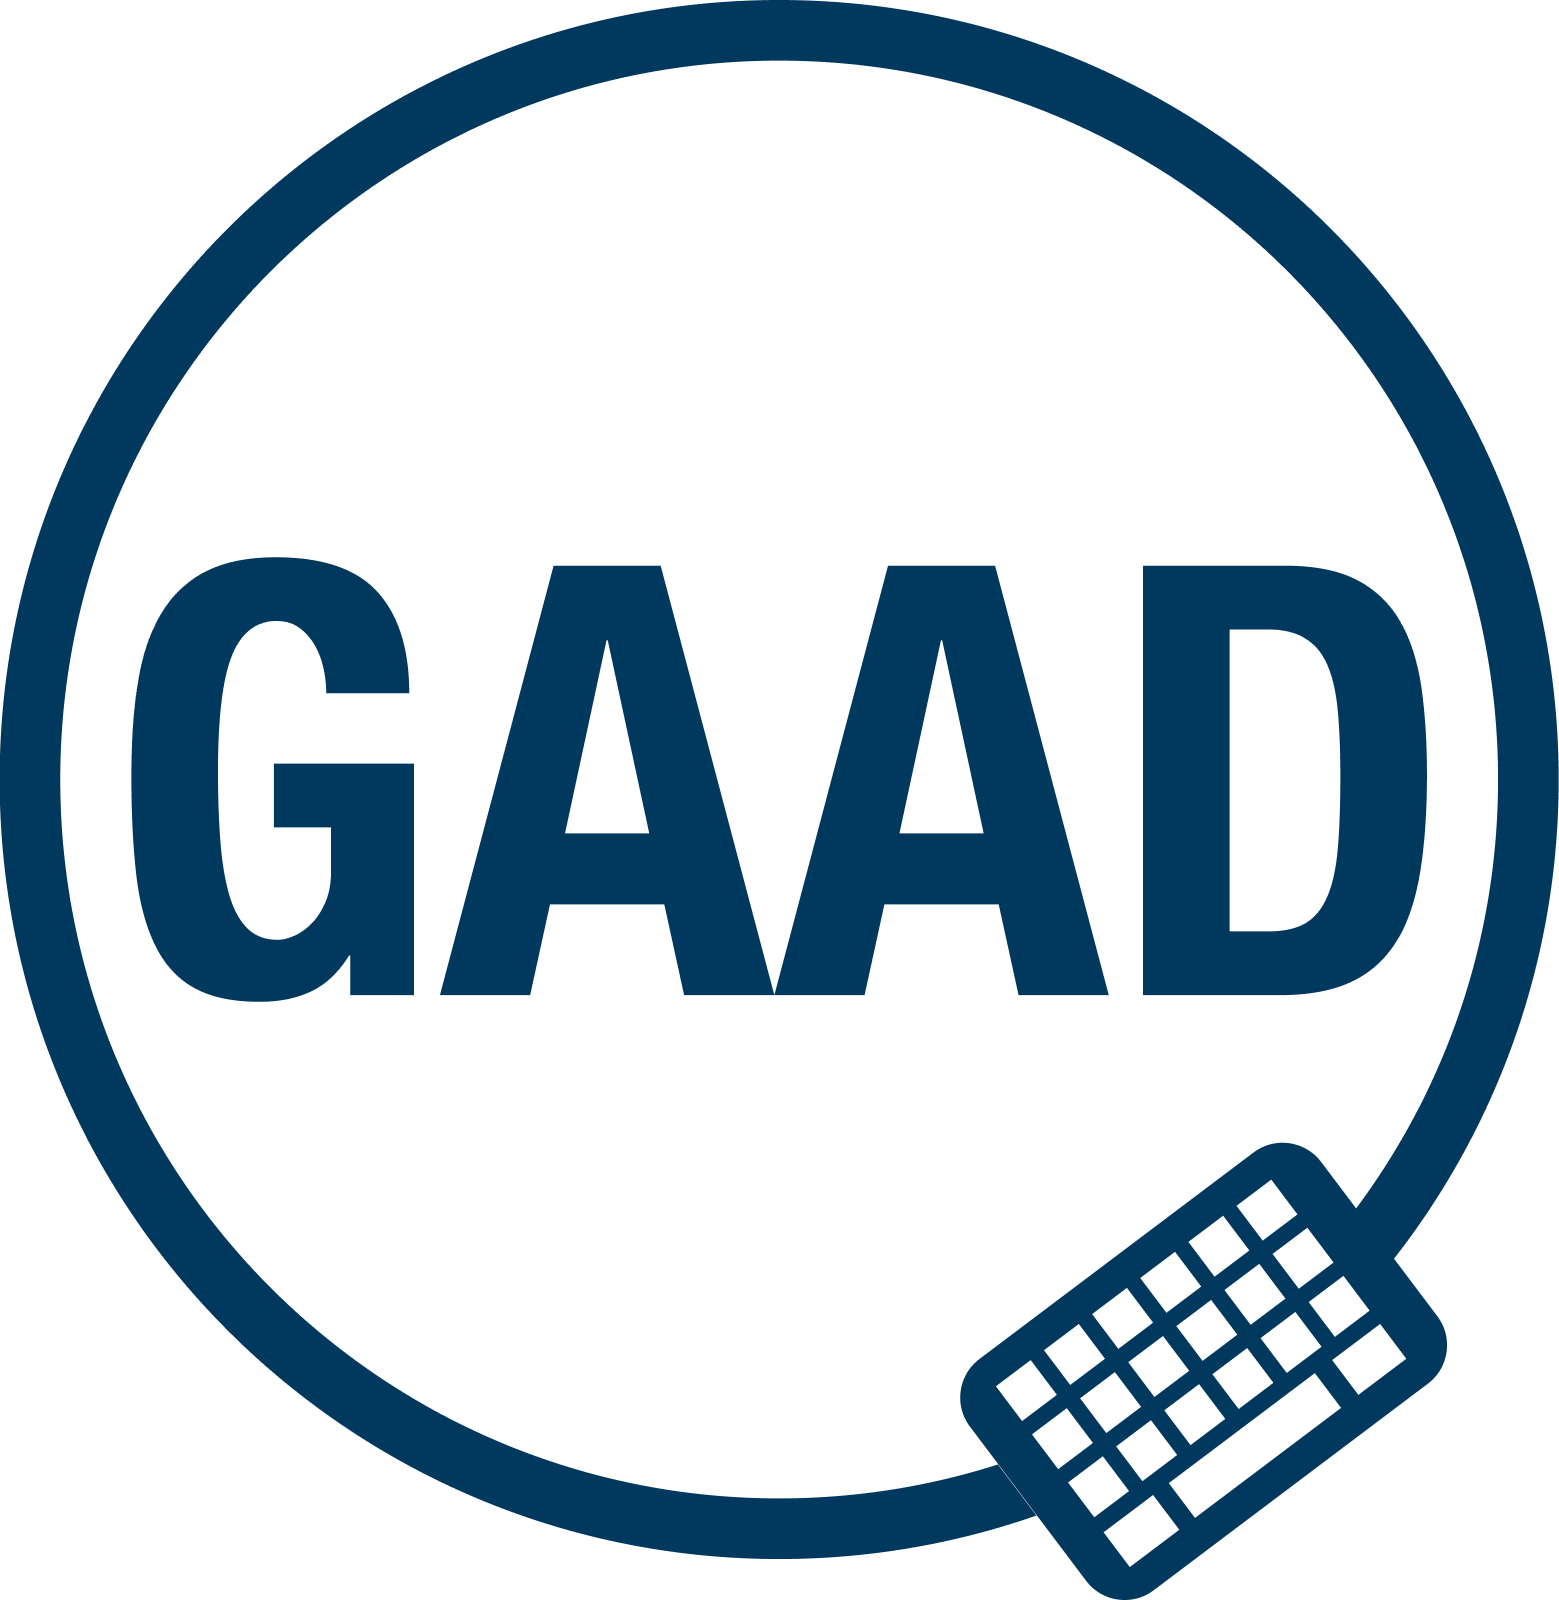 It’s Almost Time for Global Accessibility Awareness Day (GAAD) Again